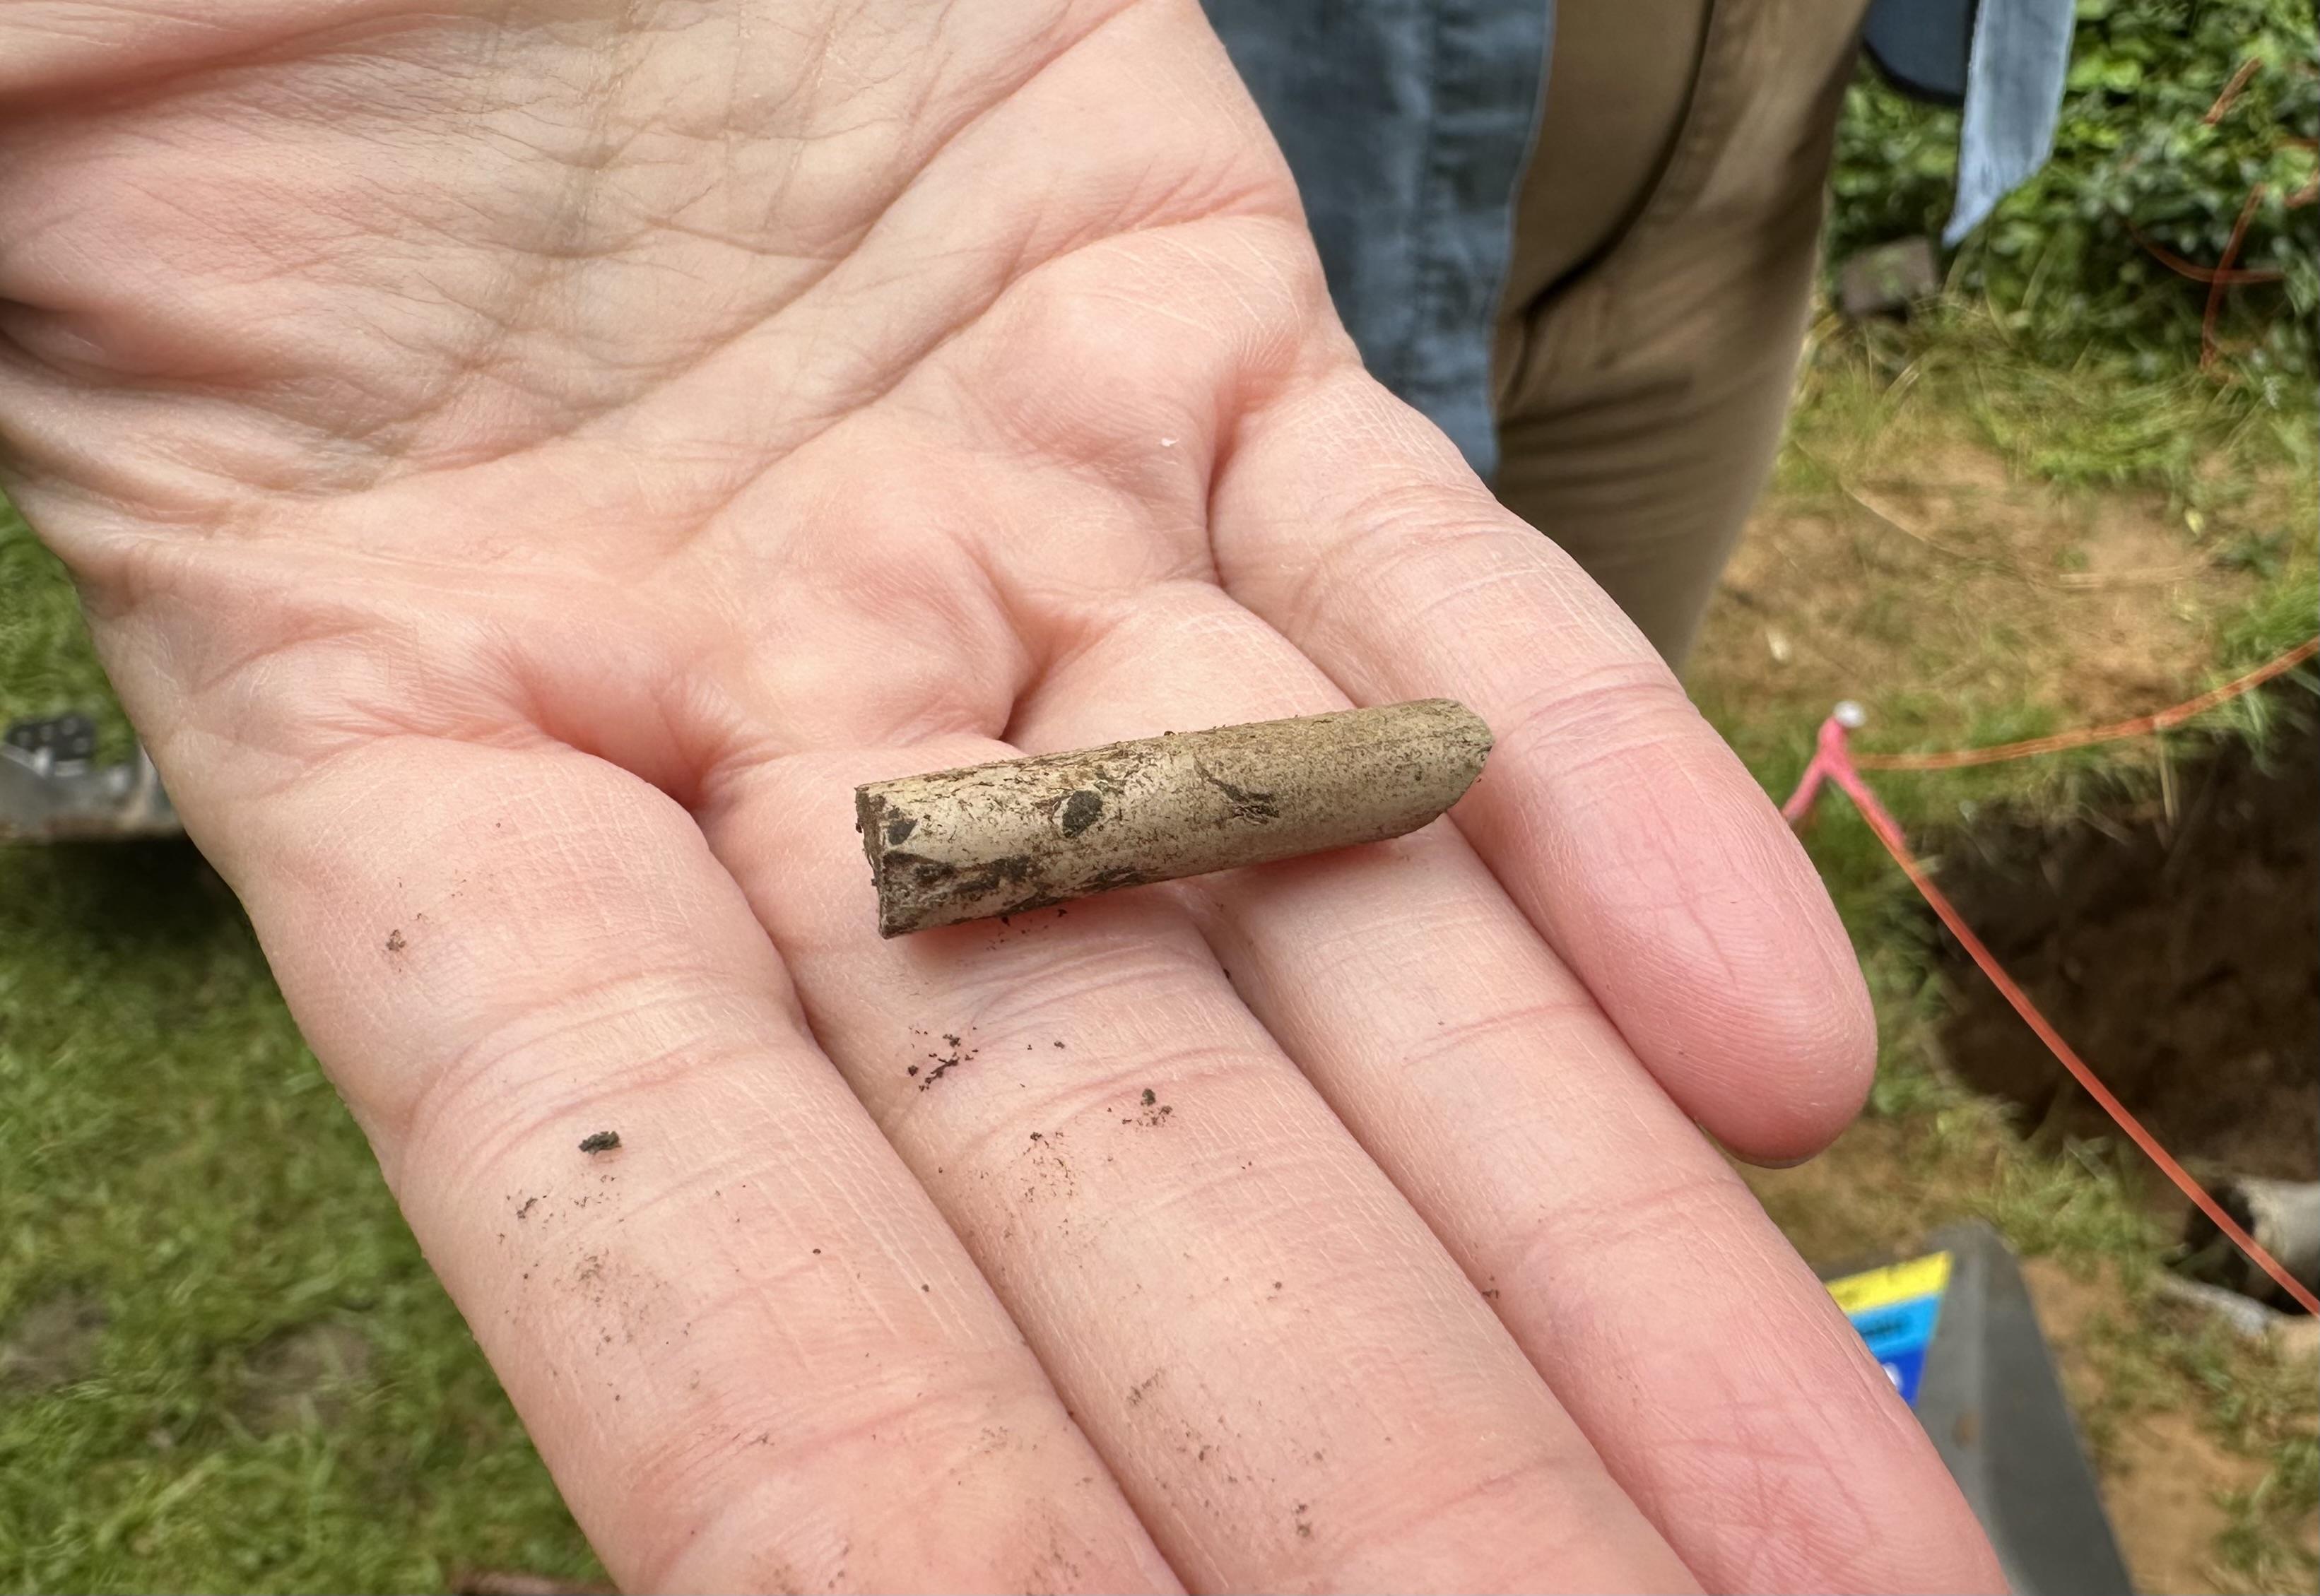 Piece of clay pipe found at archaeological dig site.